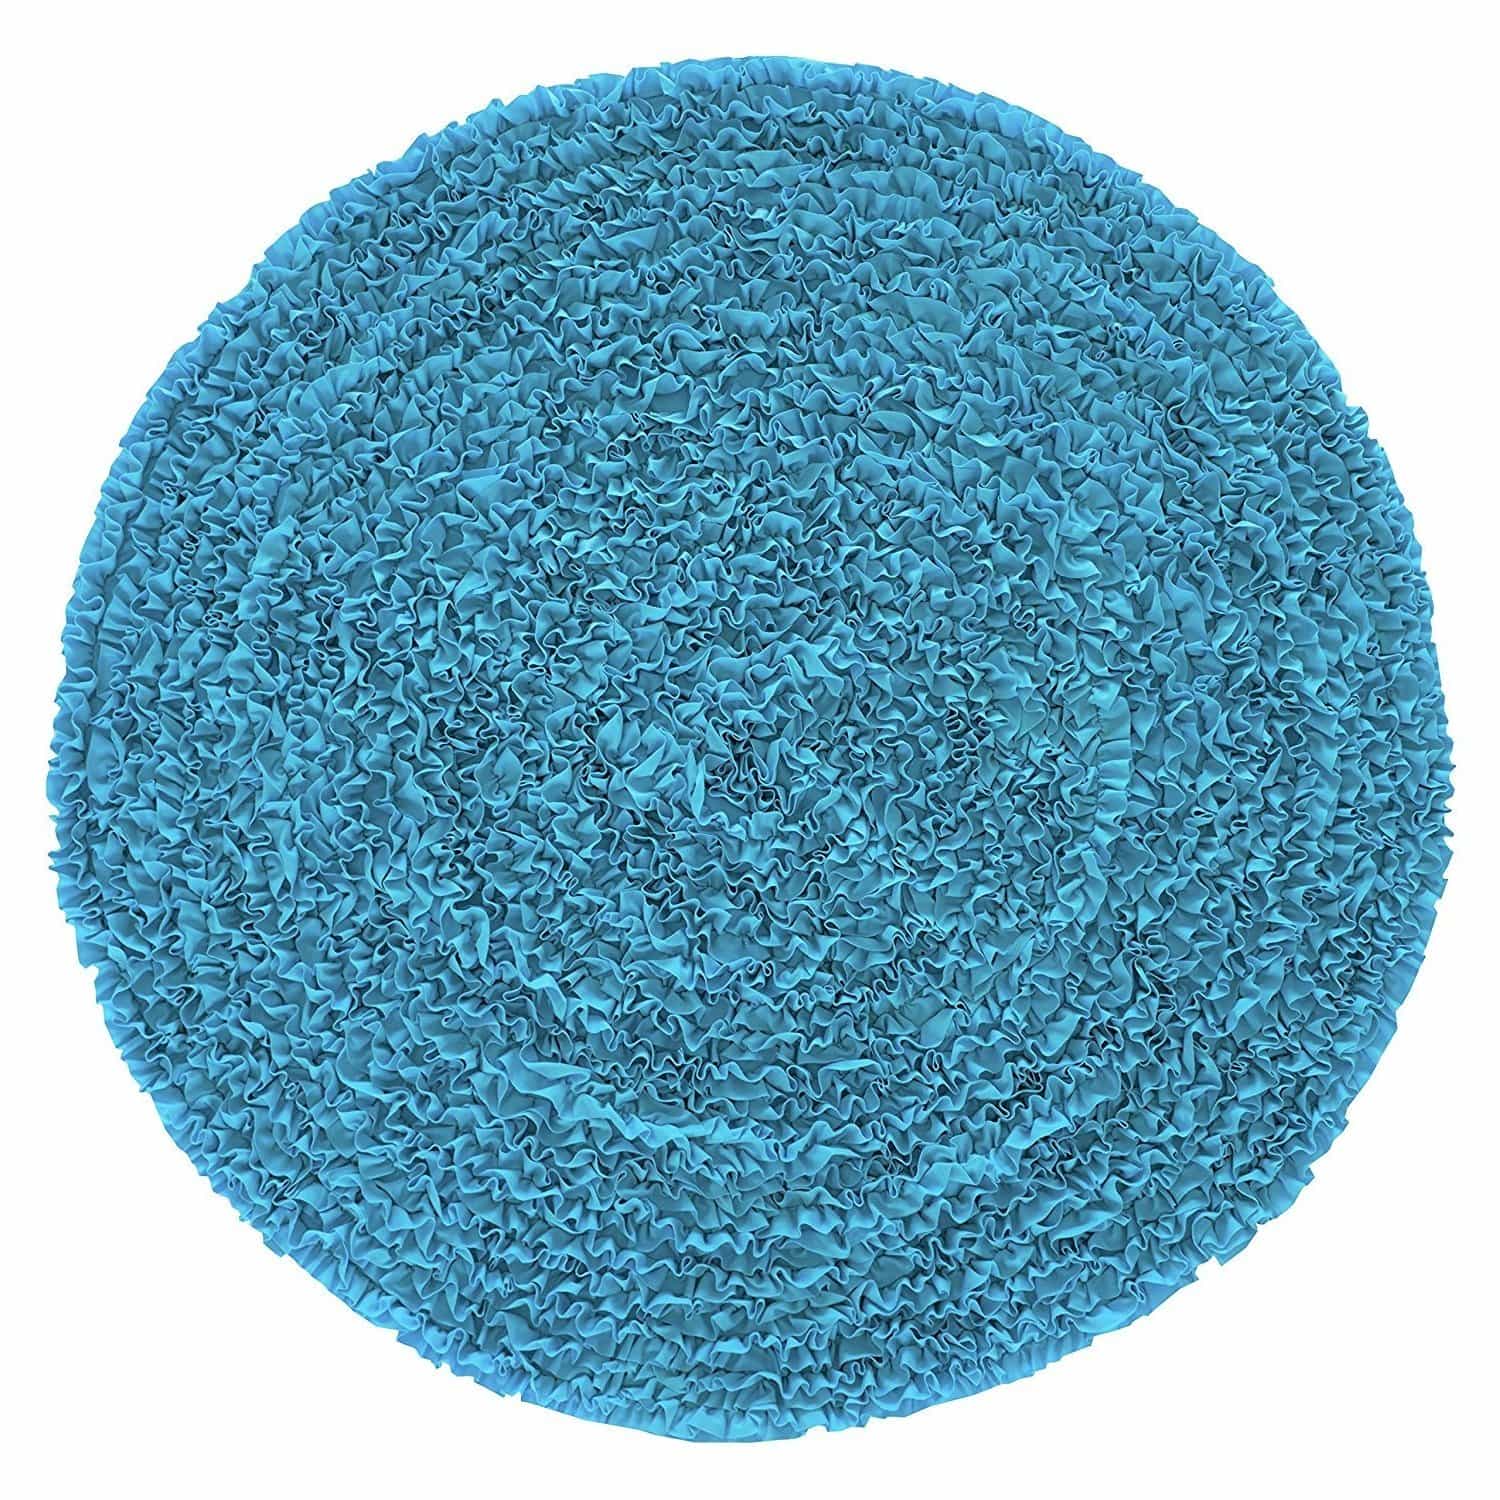 5 Ft Round Turquoise Ruffle Rug - Nursery Rugs Clearance-Rugs-Jack and Jill Boutique